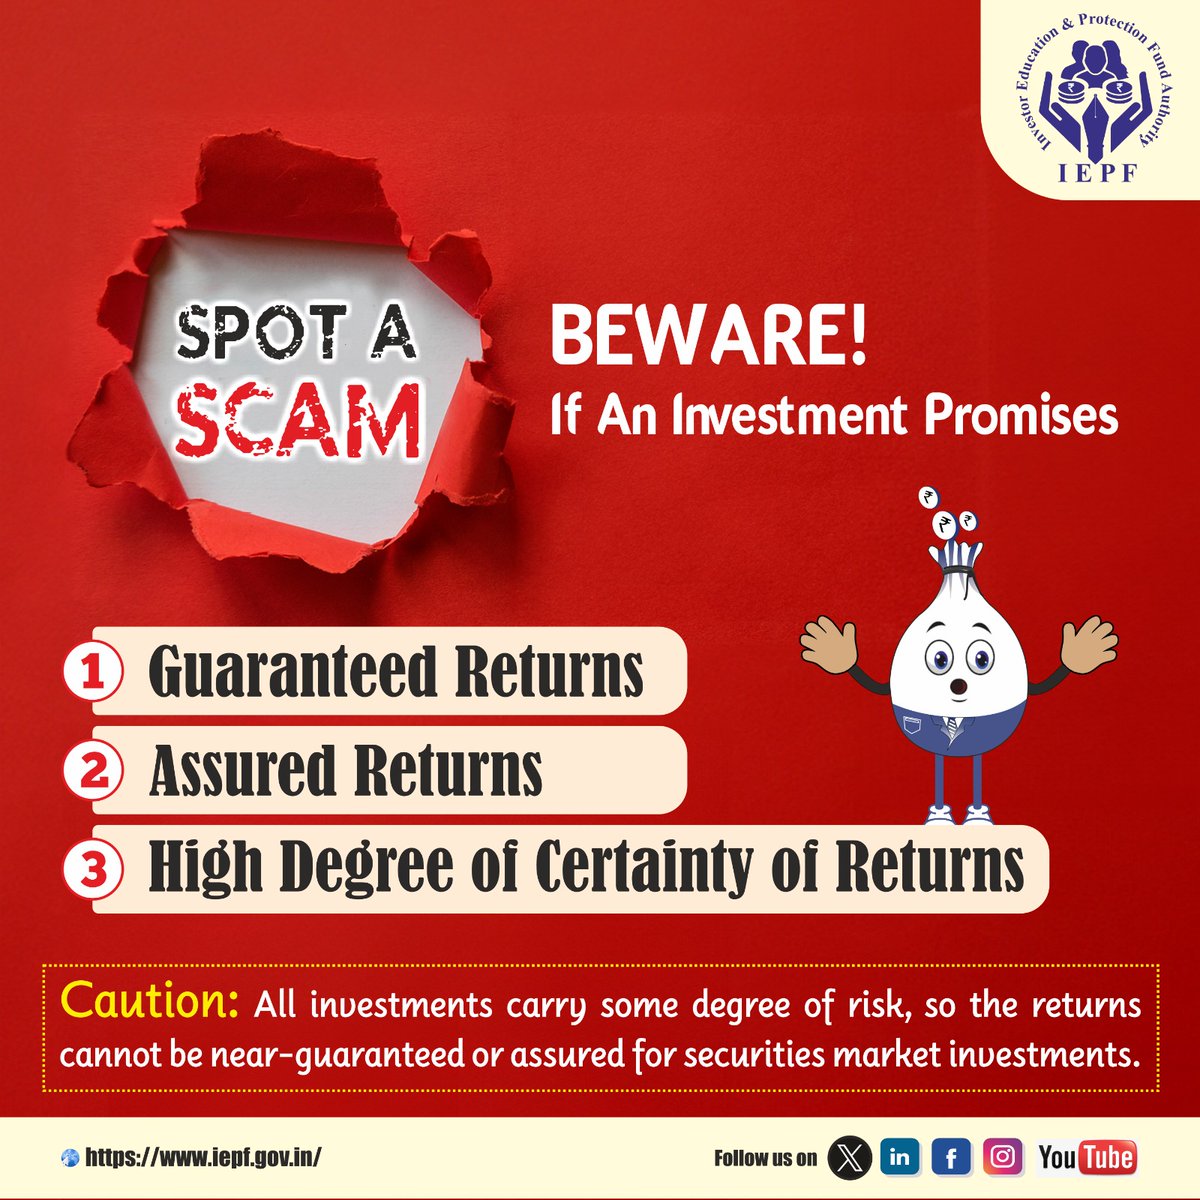 More than falling for a scam, it is critical to identify a scam and protect oneself from financial fraud. #IEPFA advises investors to stay alert and be informed.

#FinancialScam #InformedInvestor #EmpoweredInvestor #SmartInvestor